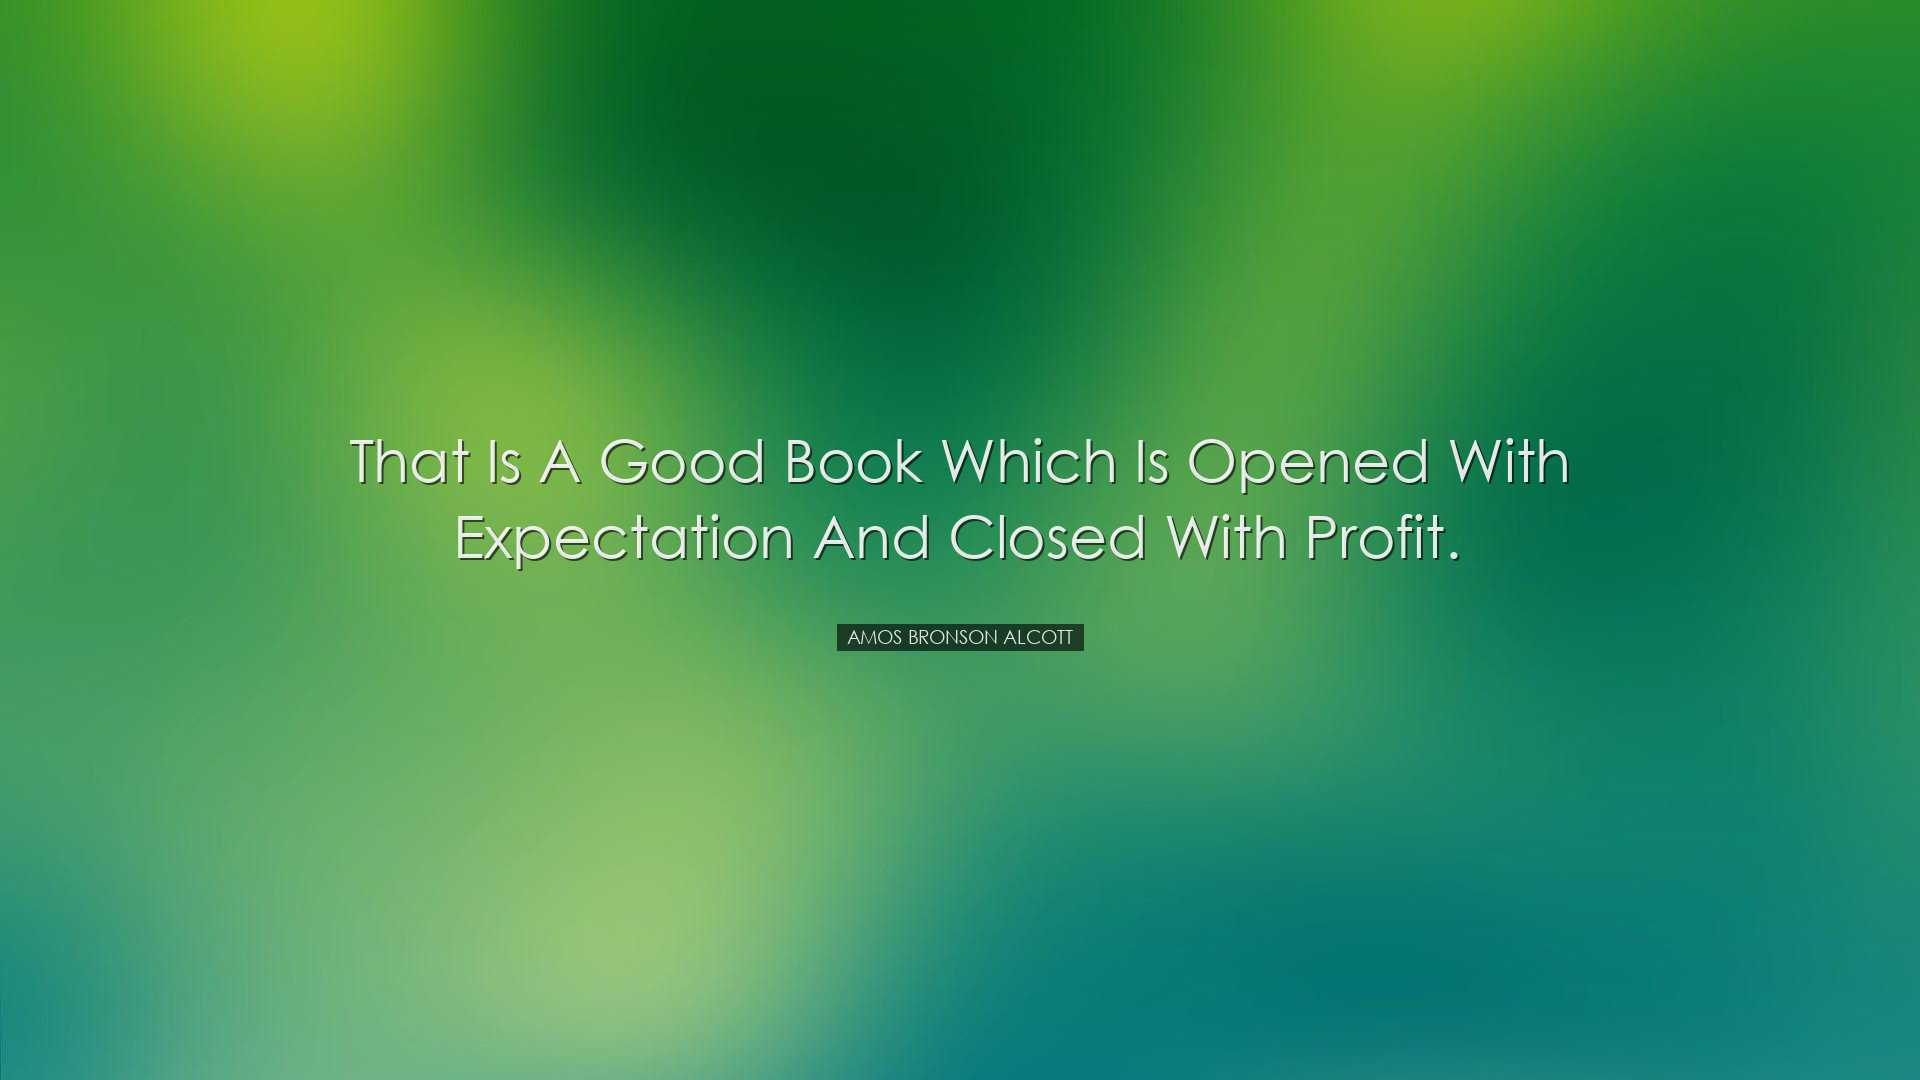 That is a good book which is opened with expectation and closed wi